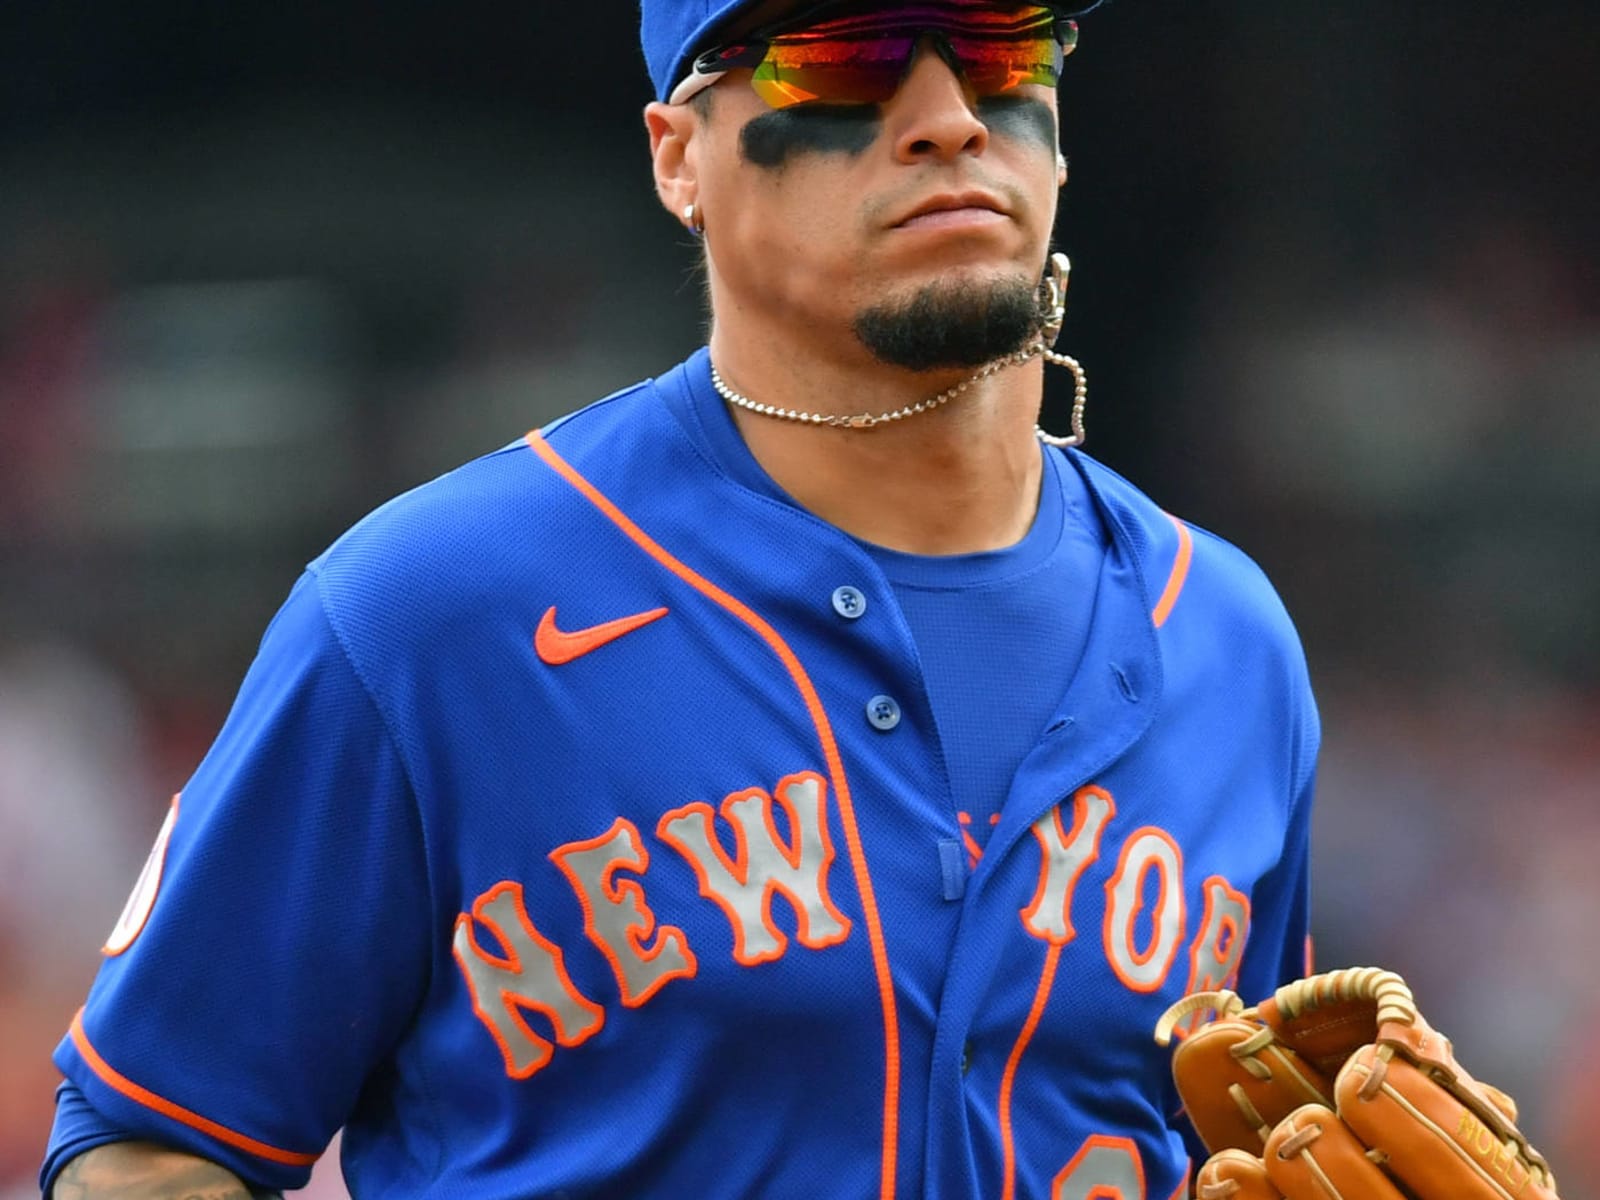 Mets fans boo Baez after 'thumbs-down' controversy, apologies